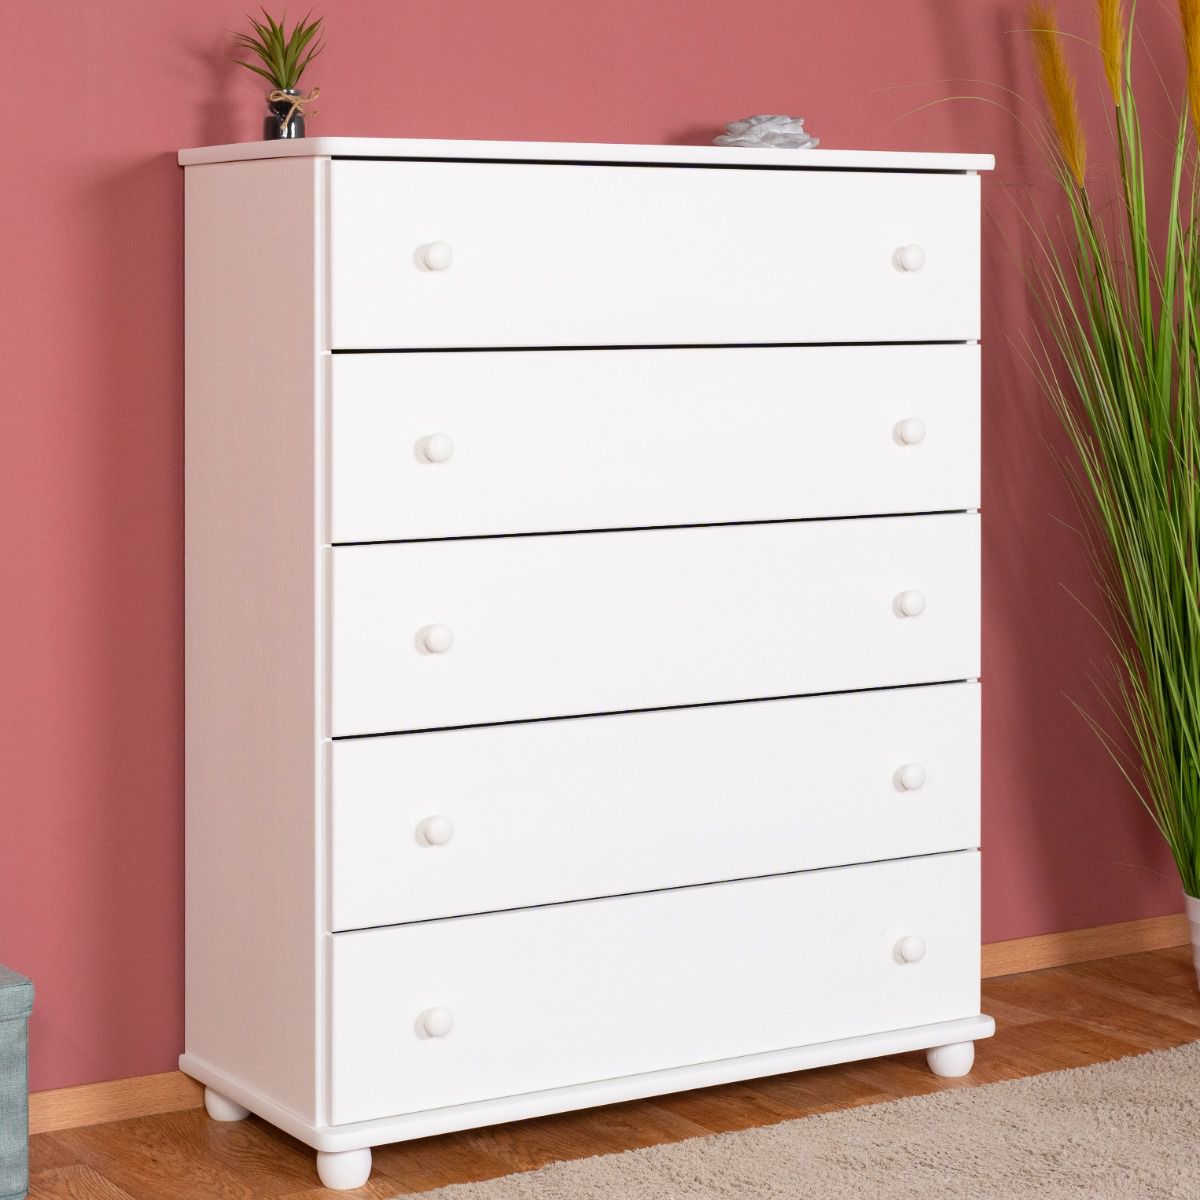 Chest of drawers solid pine solid wood white lacquered Junco 139 - Dimensions: 123 x 100 x 42 cm (H x W x D)